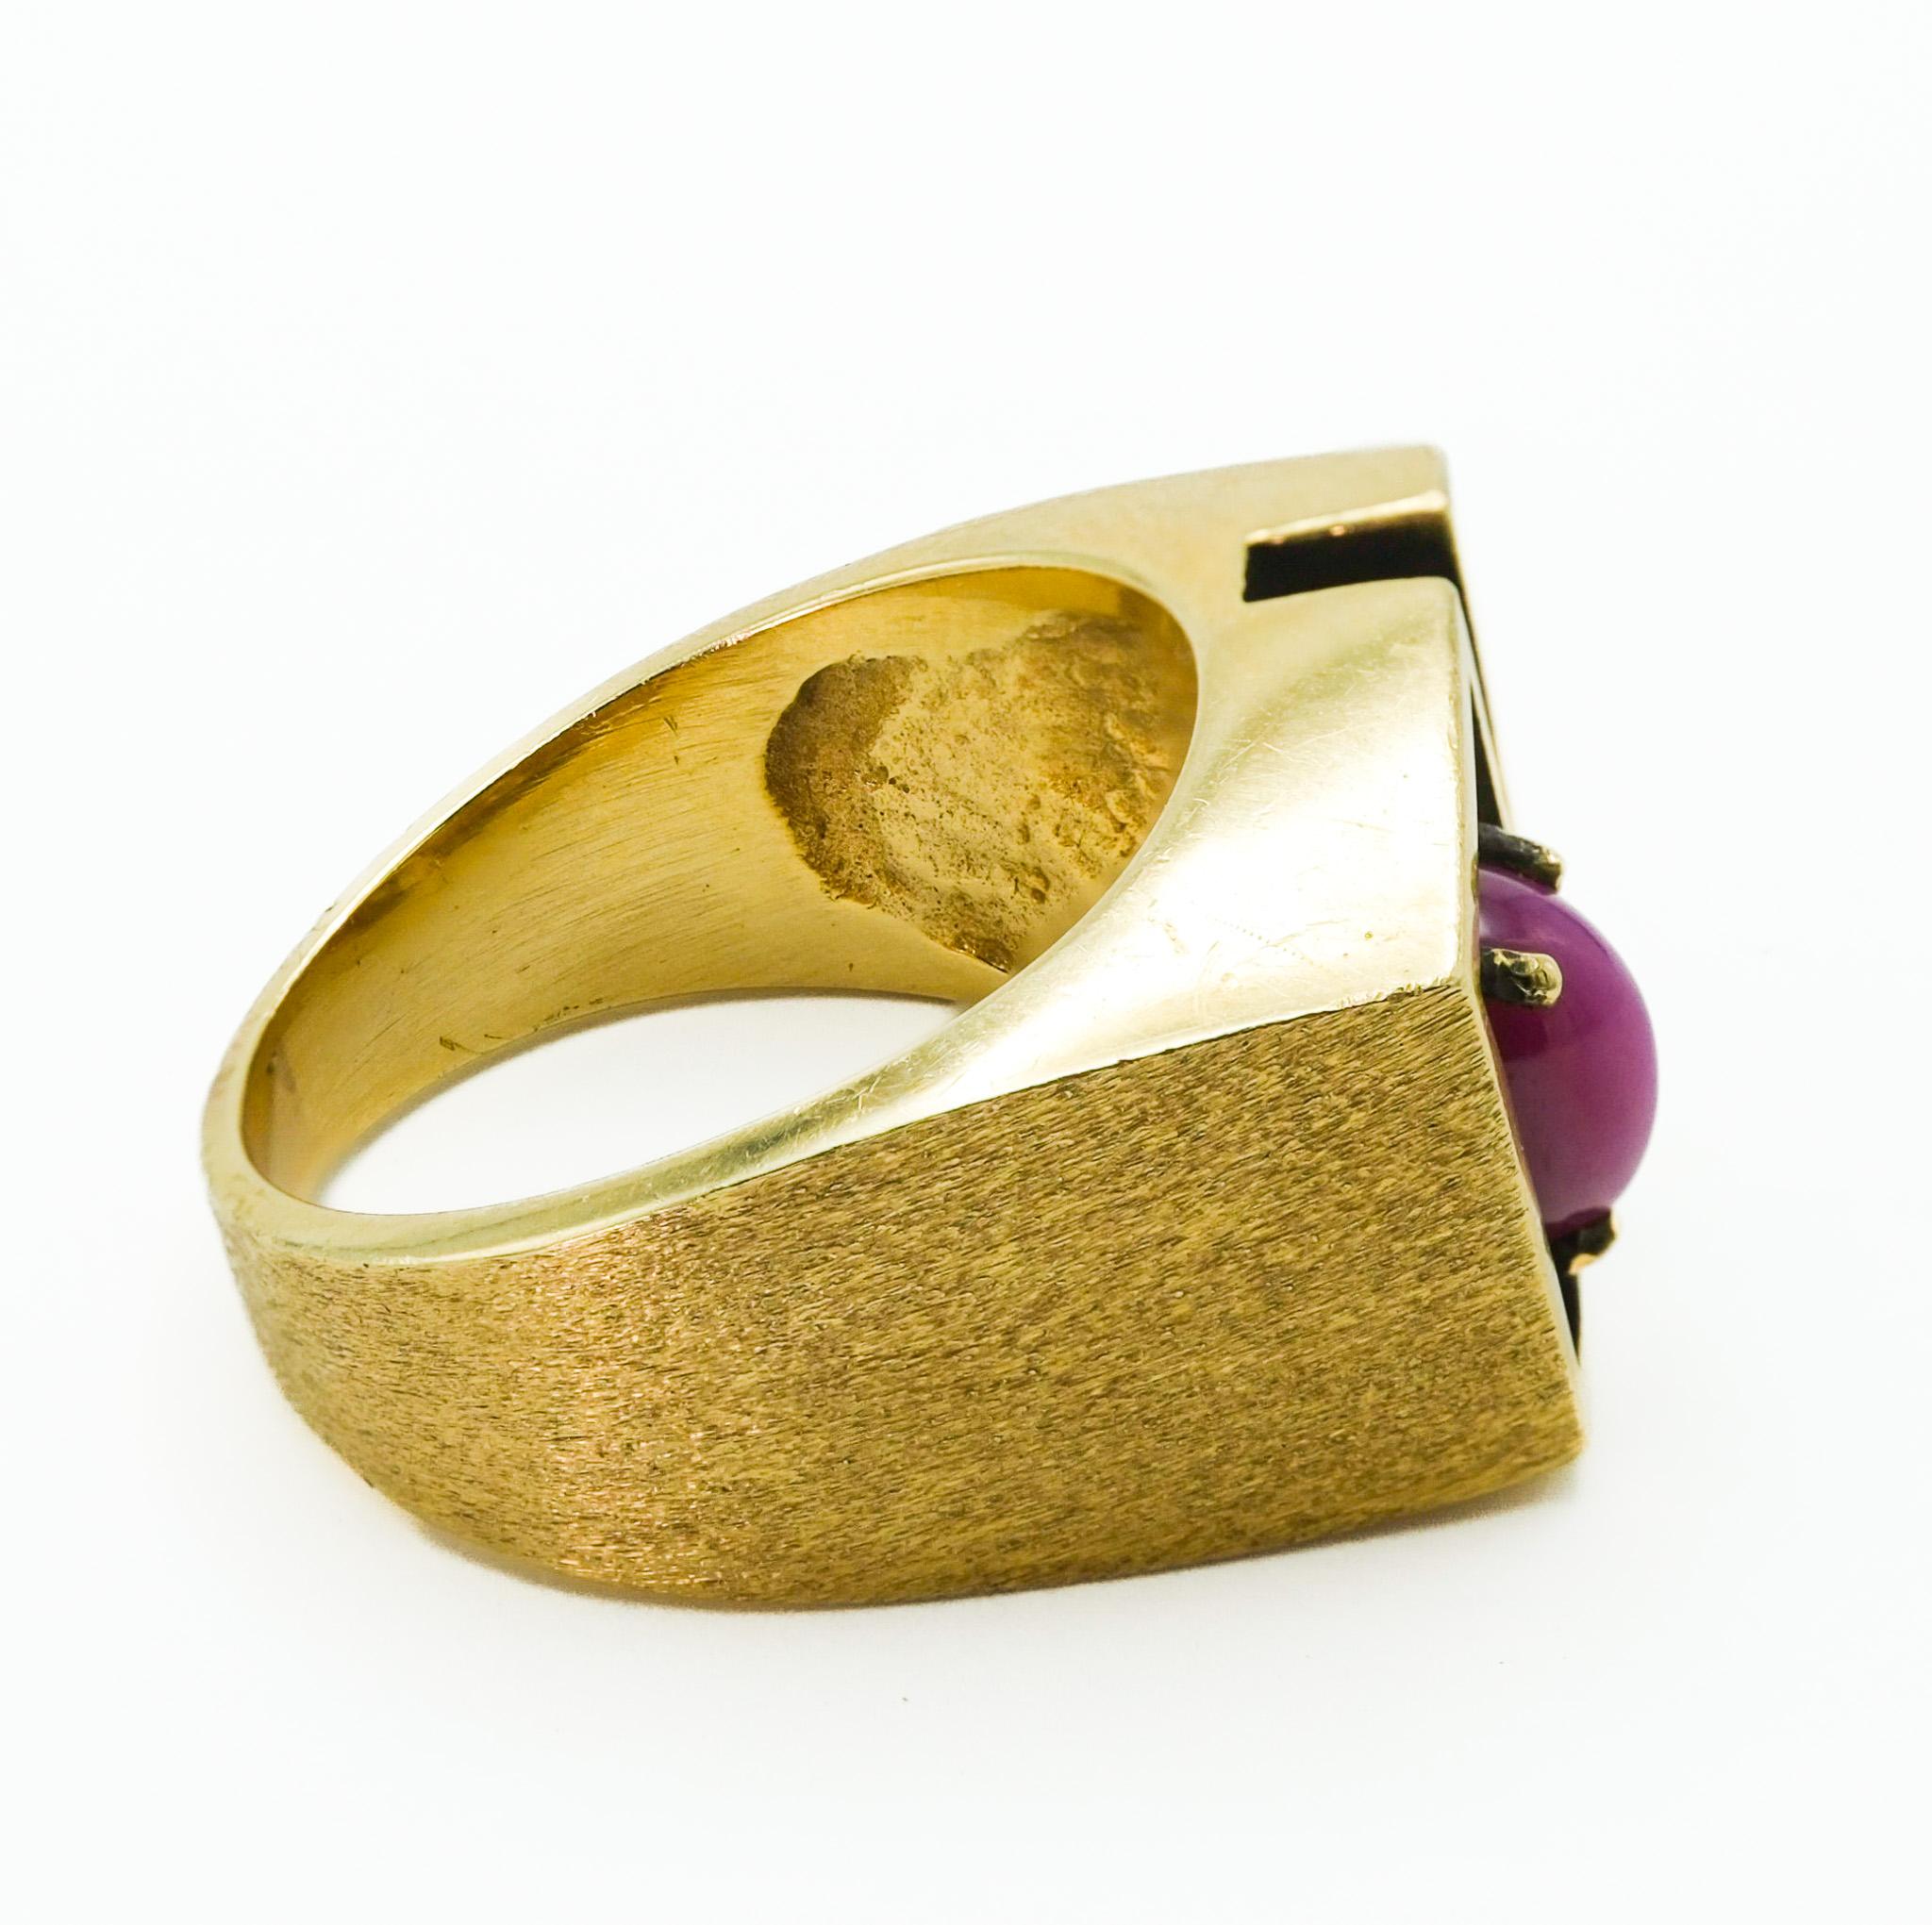 This 14k yellow gold ring presents a unique and distinct structural design. Its form is noticeably large and boxy, departing from conventional ring shapes. At the center of the piece lies a teardrop star ruby, weighing 1 carat, displaying a